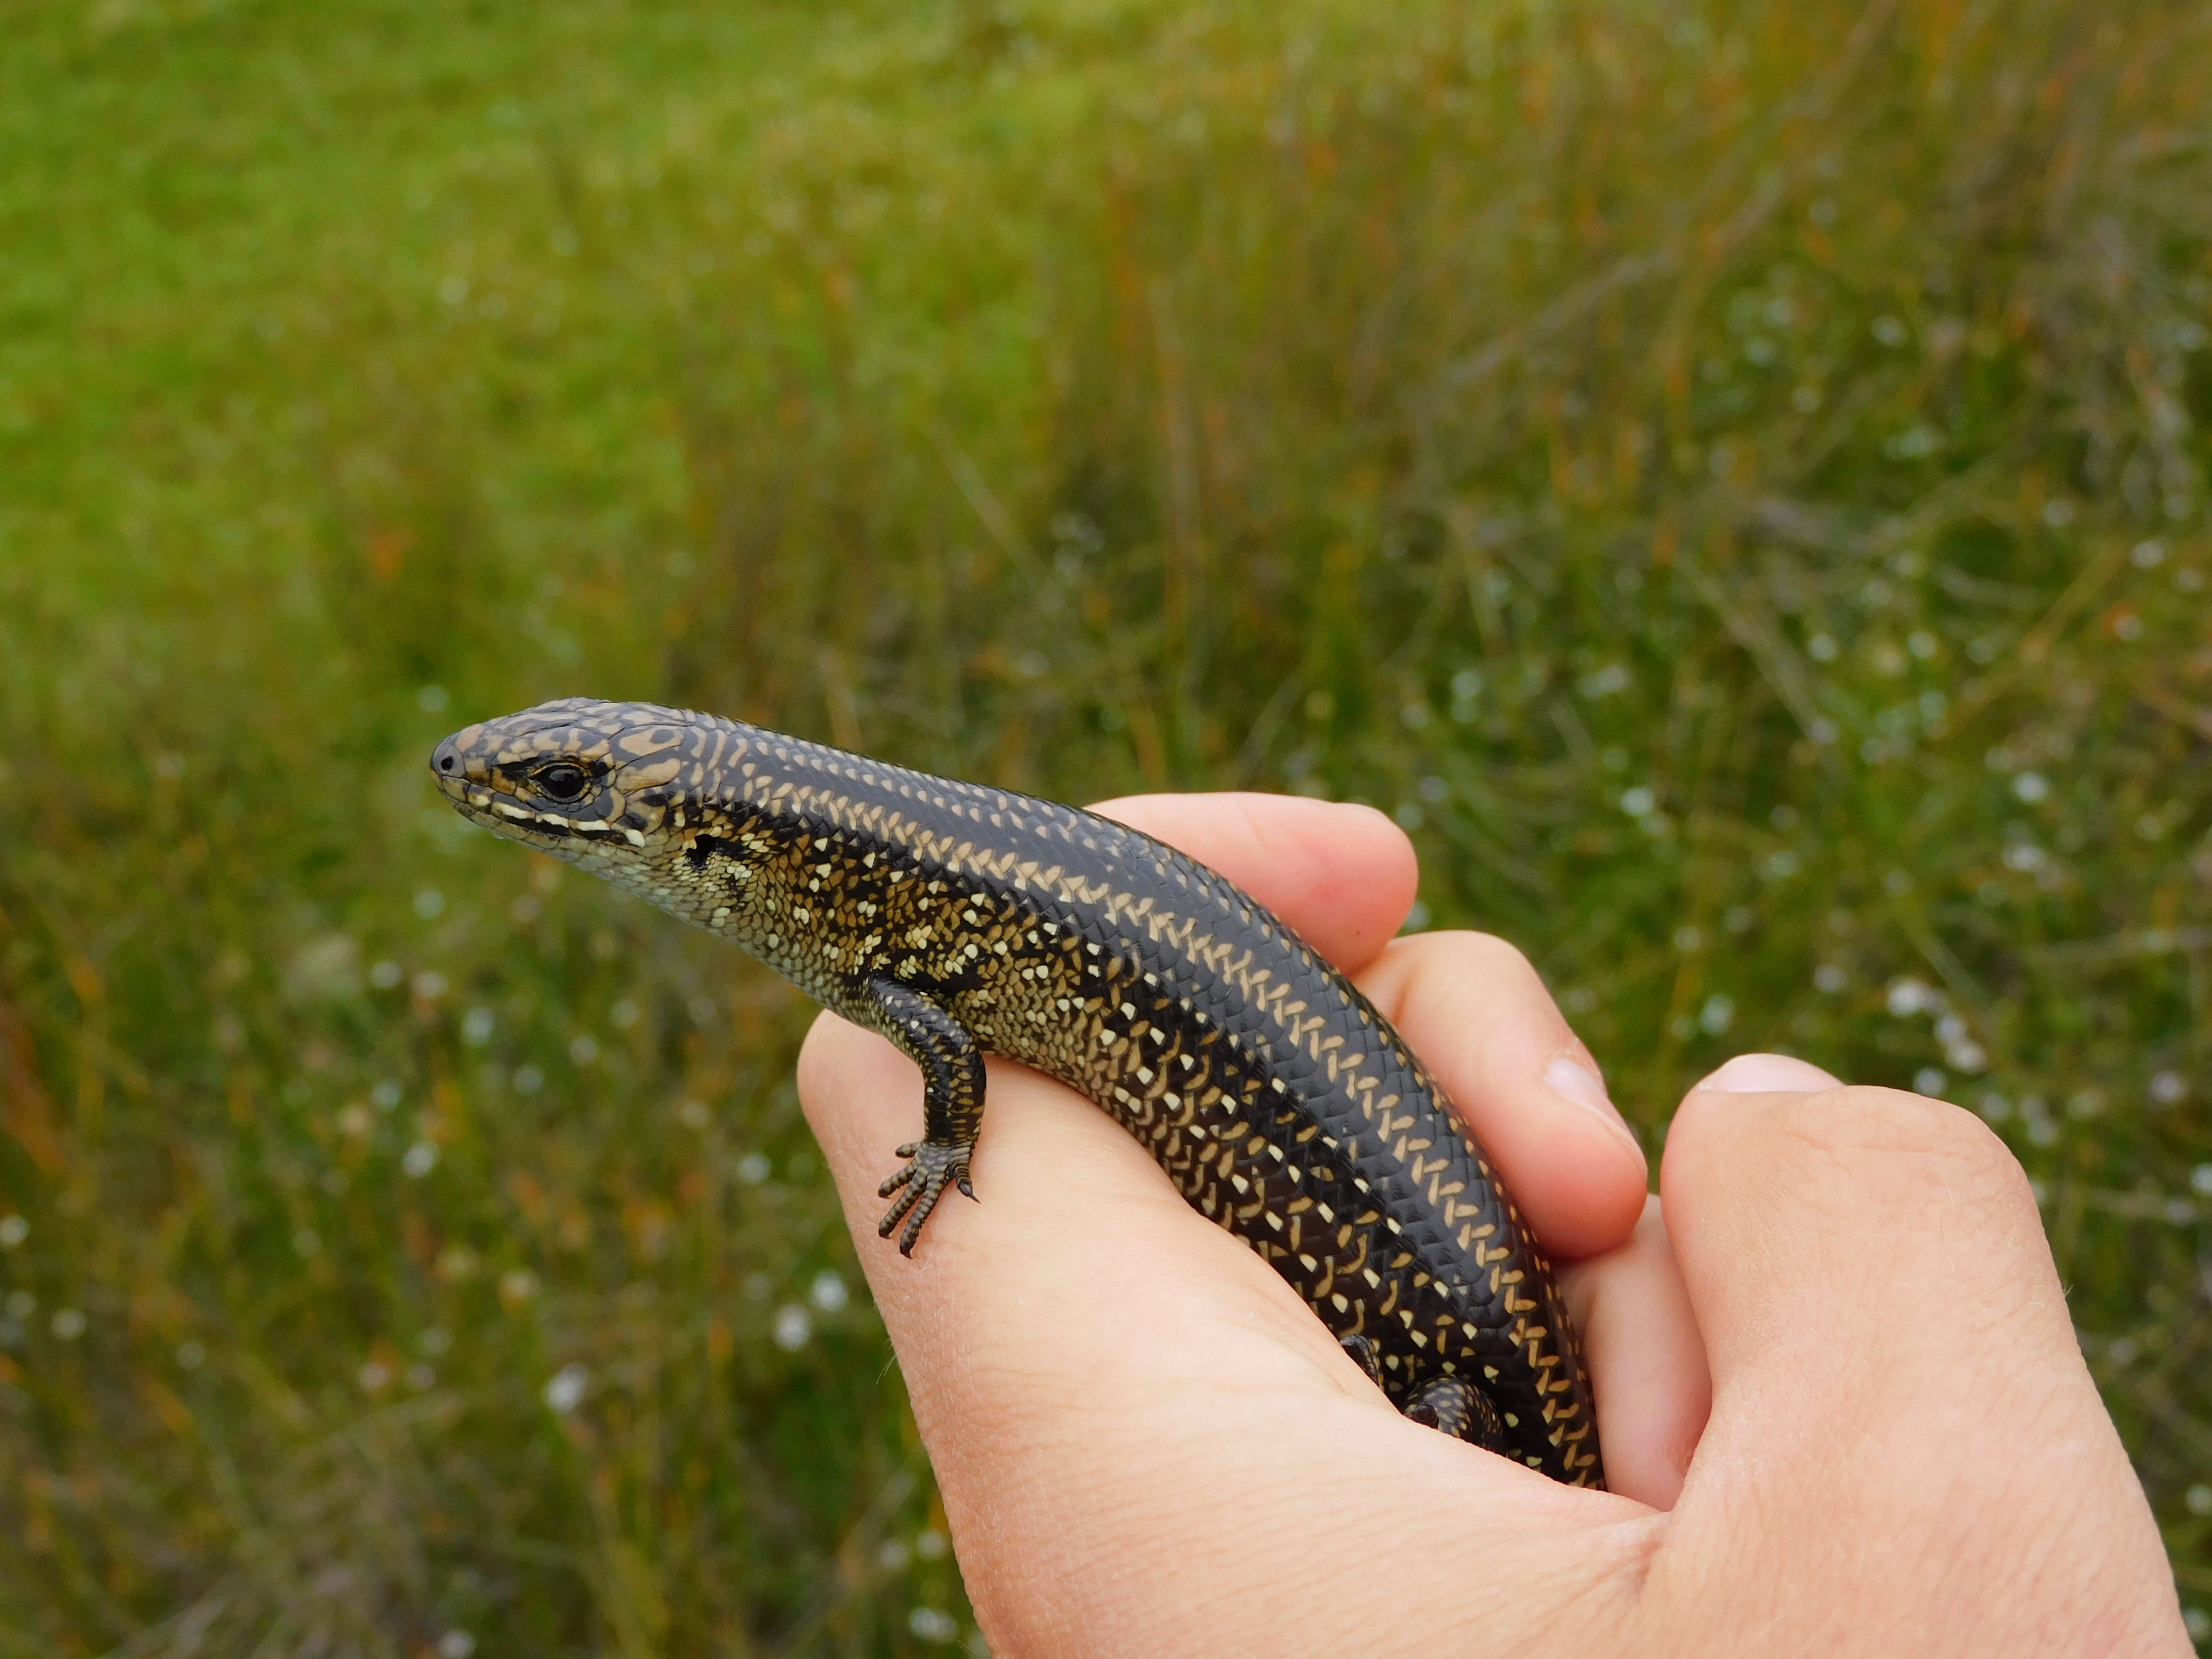 A picture of a swamp skink